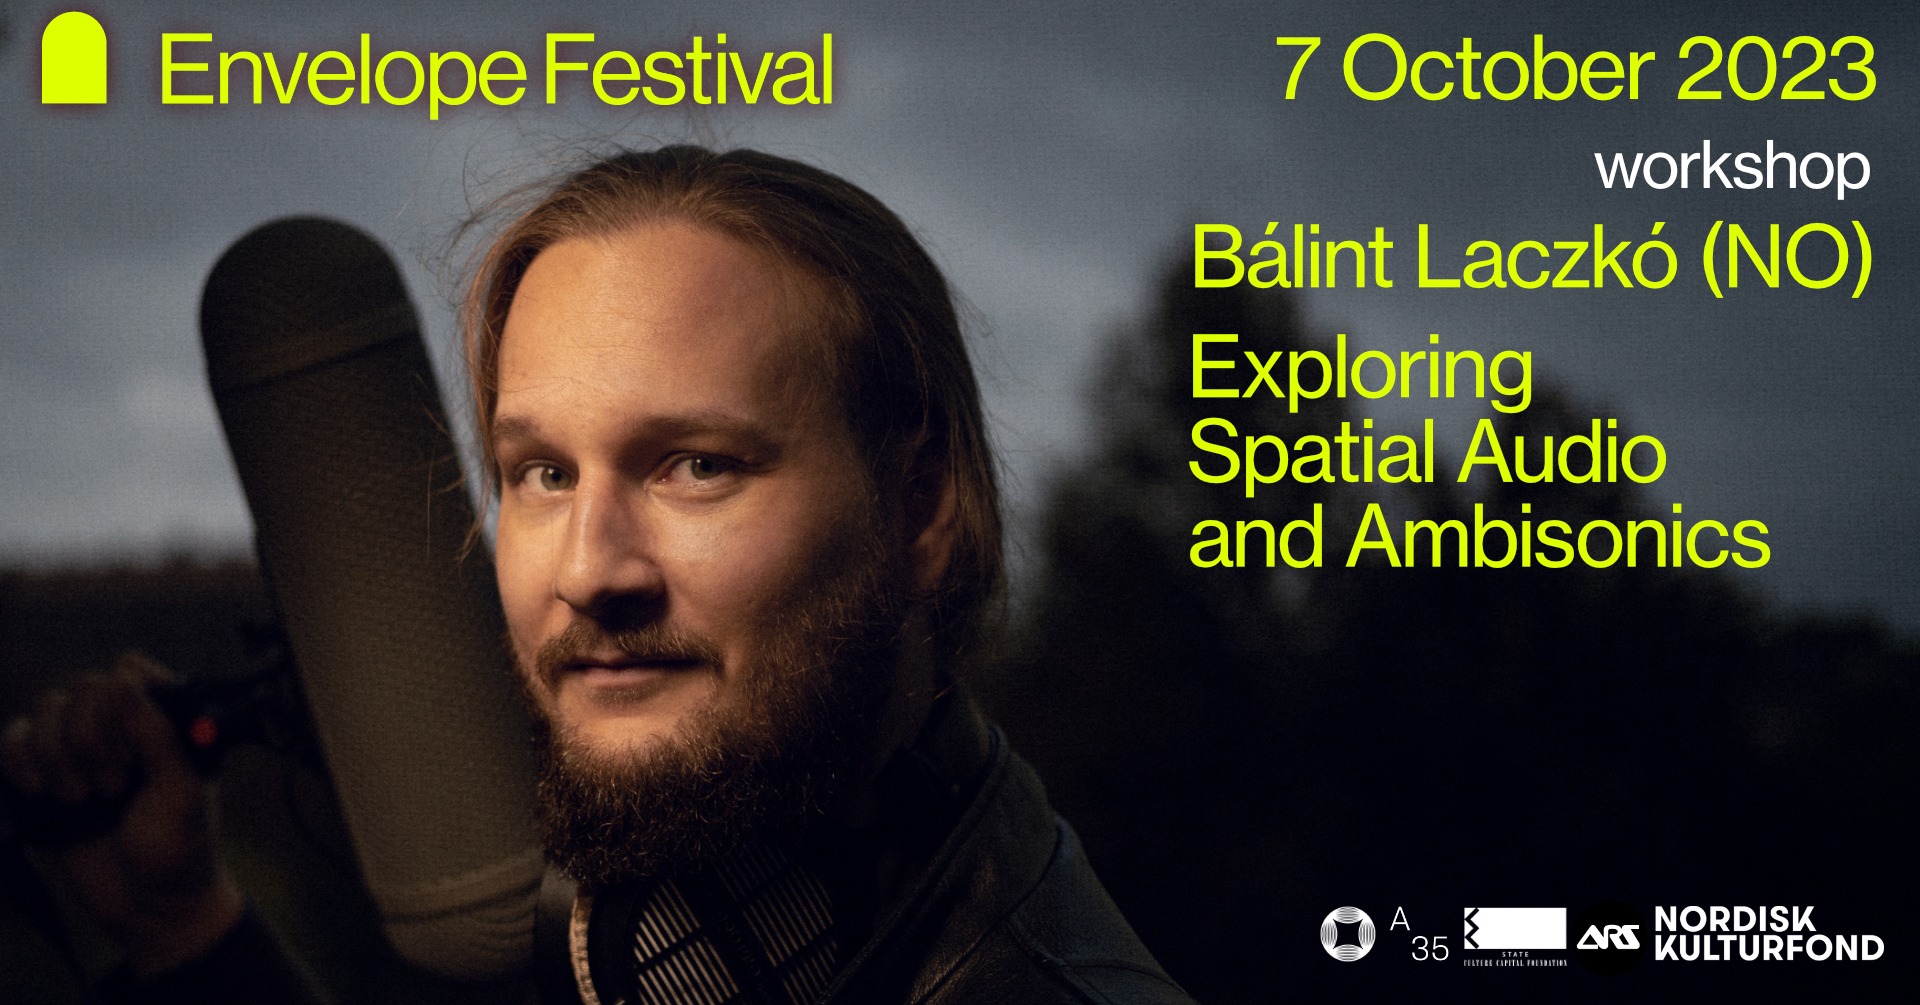 Workshop: Exploring Spatial Audio and Ambisonics with Bálint Laczkó (NO)